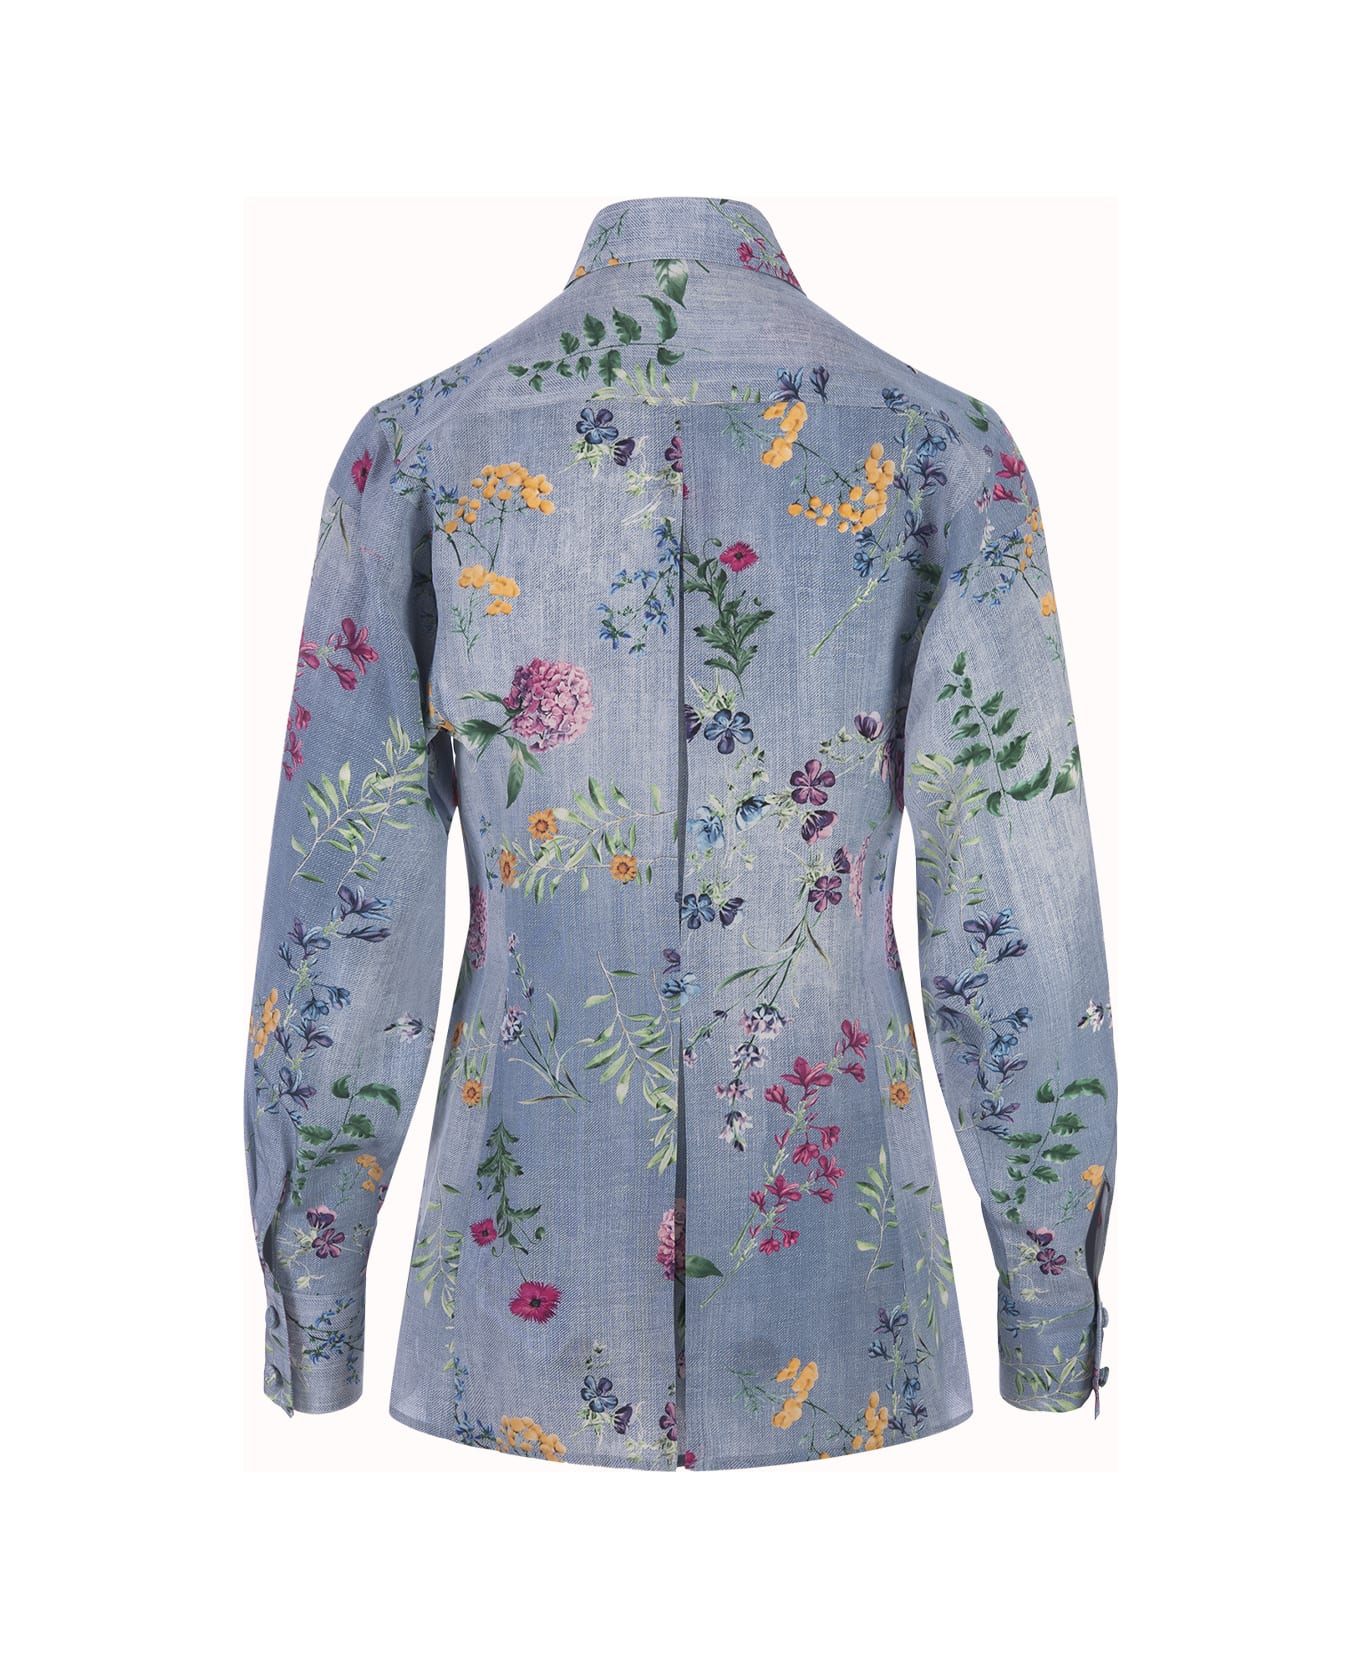 Ermanno Scervino Silk Shirt With Floral Print - Blue シャツ